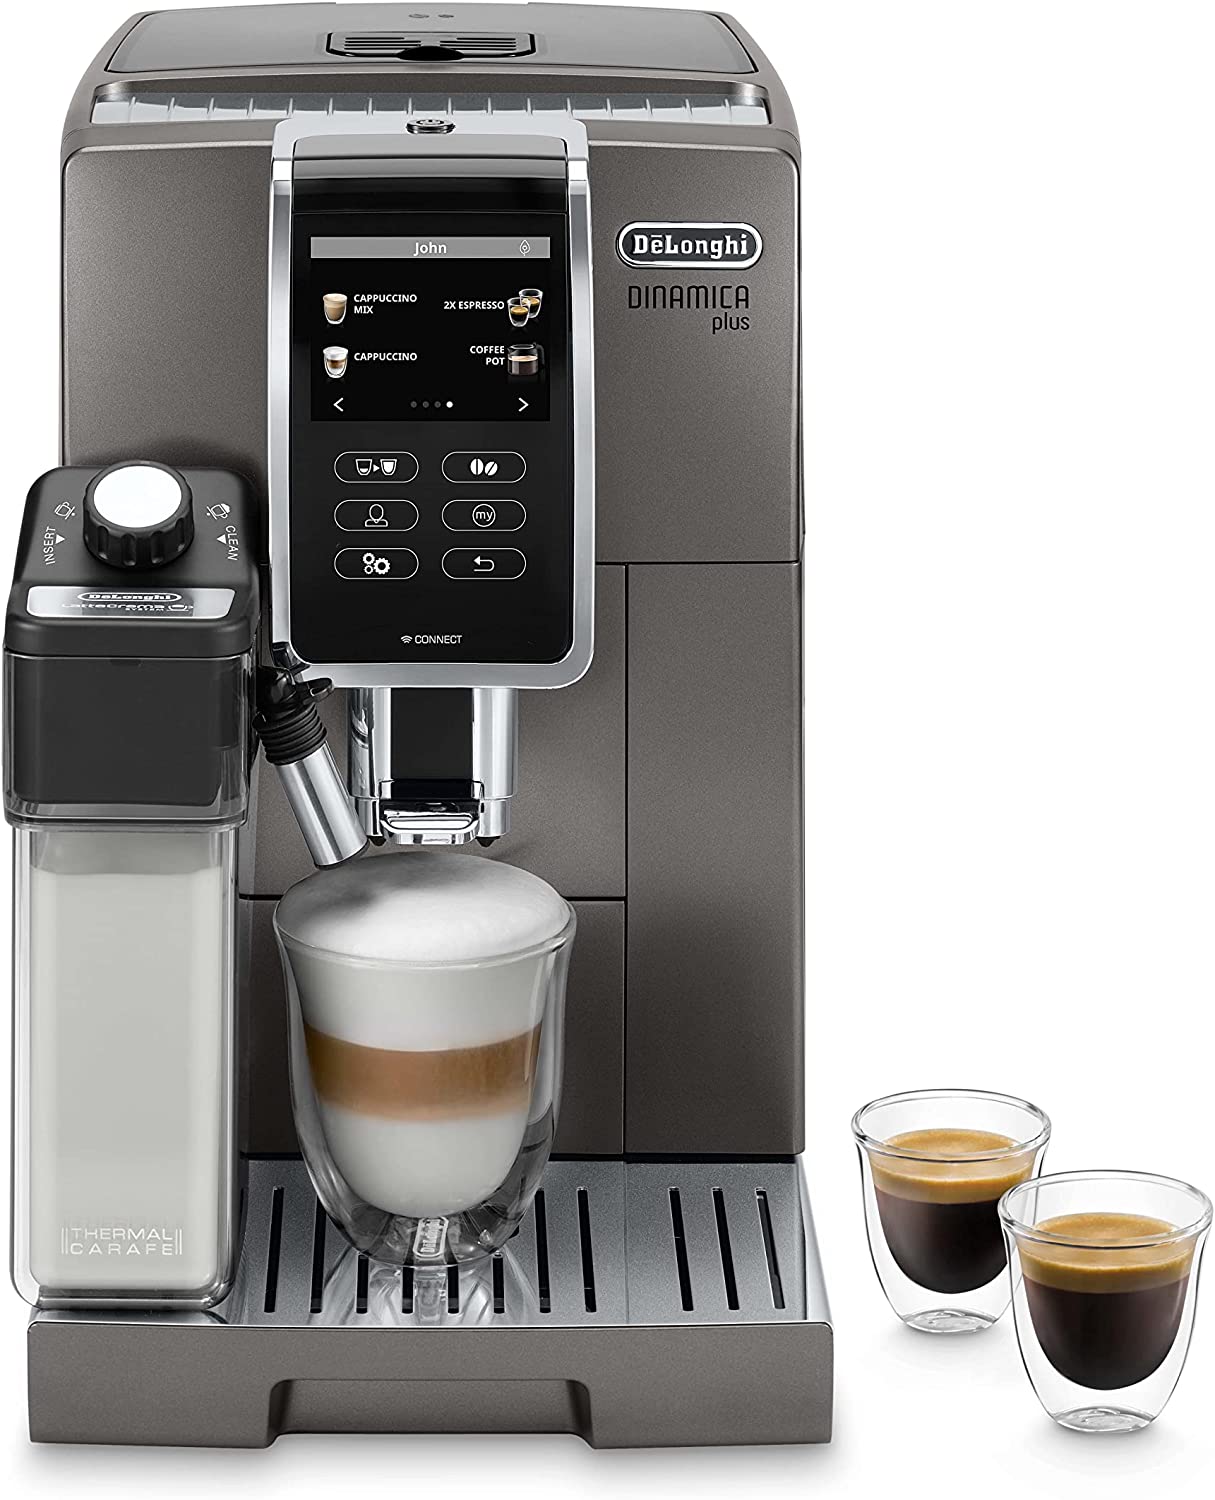 DeLonghi De\'Longhi Dinamica Plus ECAM 370.70.B Fully Automatic Coffee Machine with LatteCrema Milk System, Cappuccino & Espresso at the Push of a Button, 3.5 Inch TFT Touchscreen Colour Display, Coffee Pot Function, Black